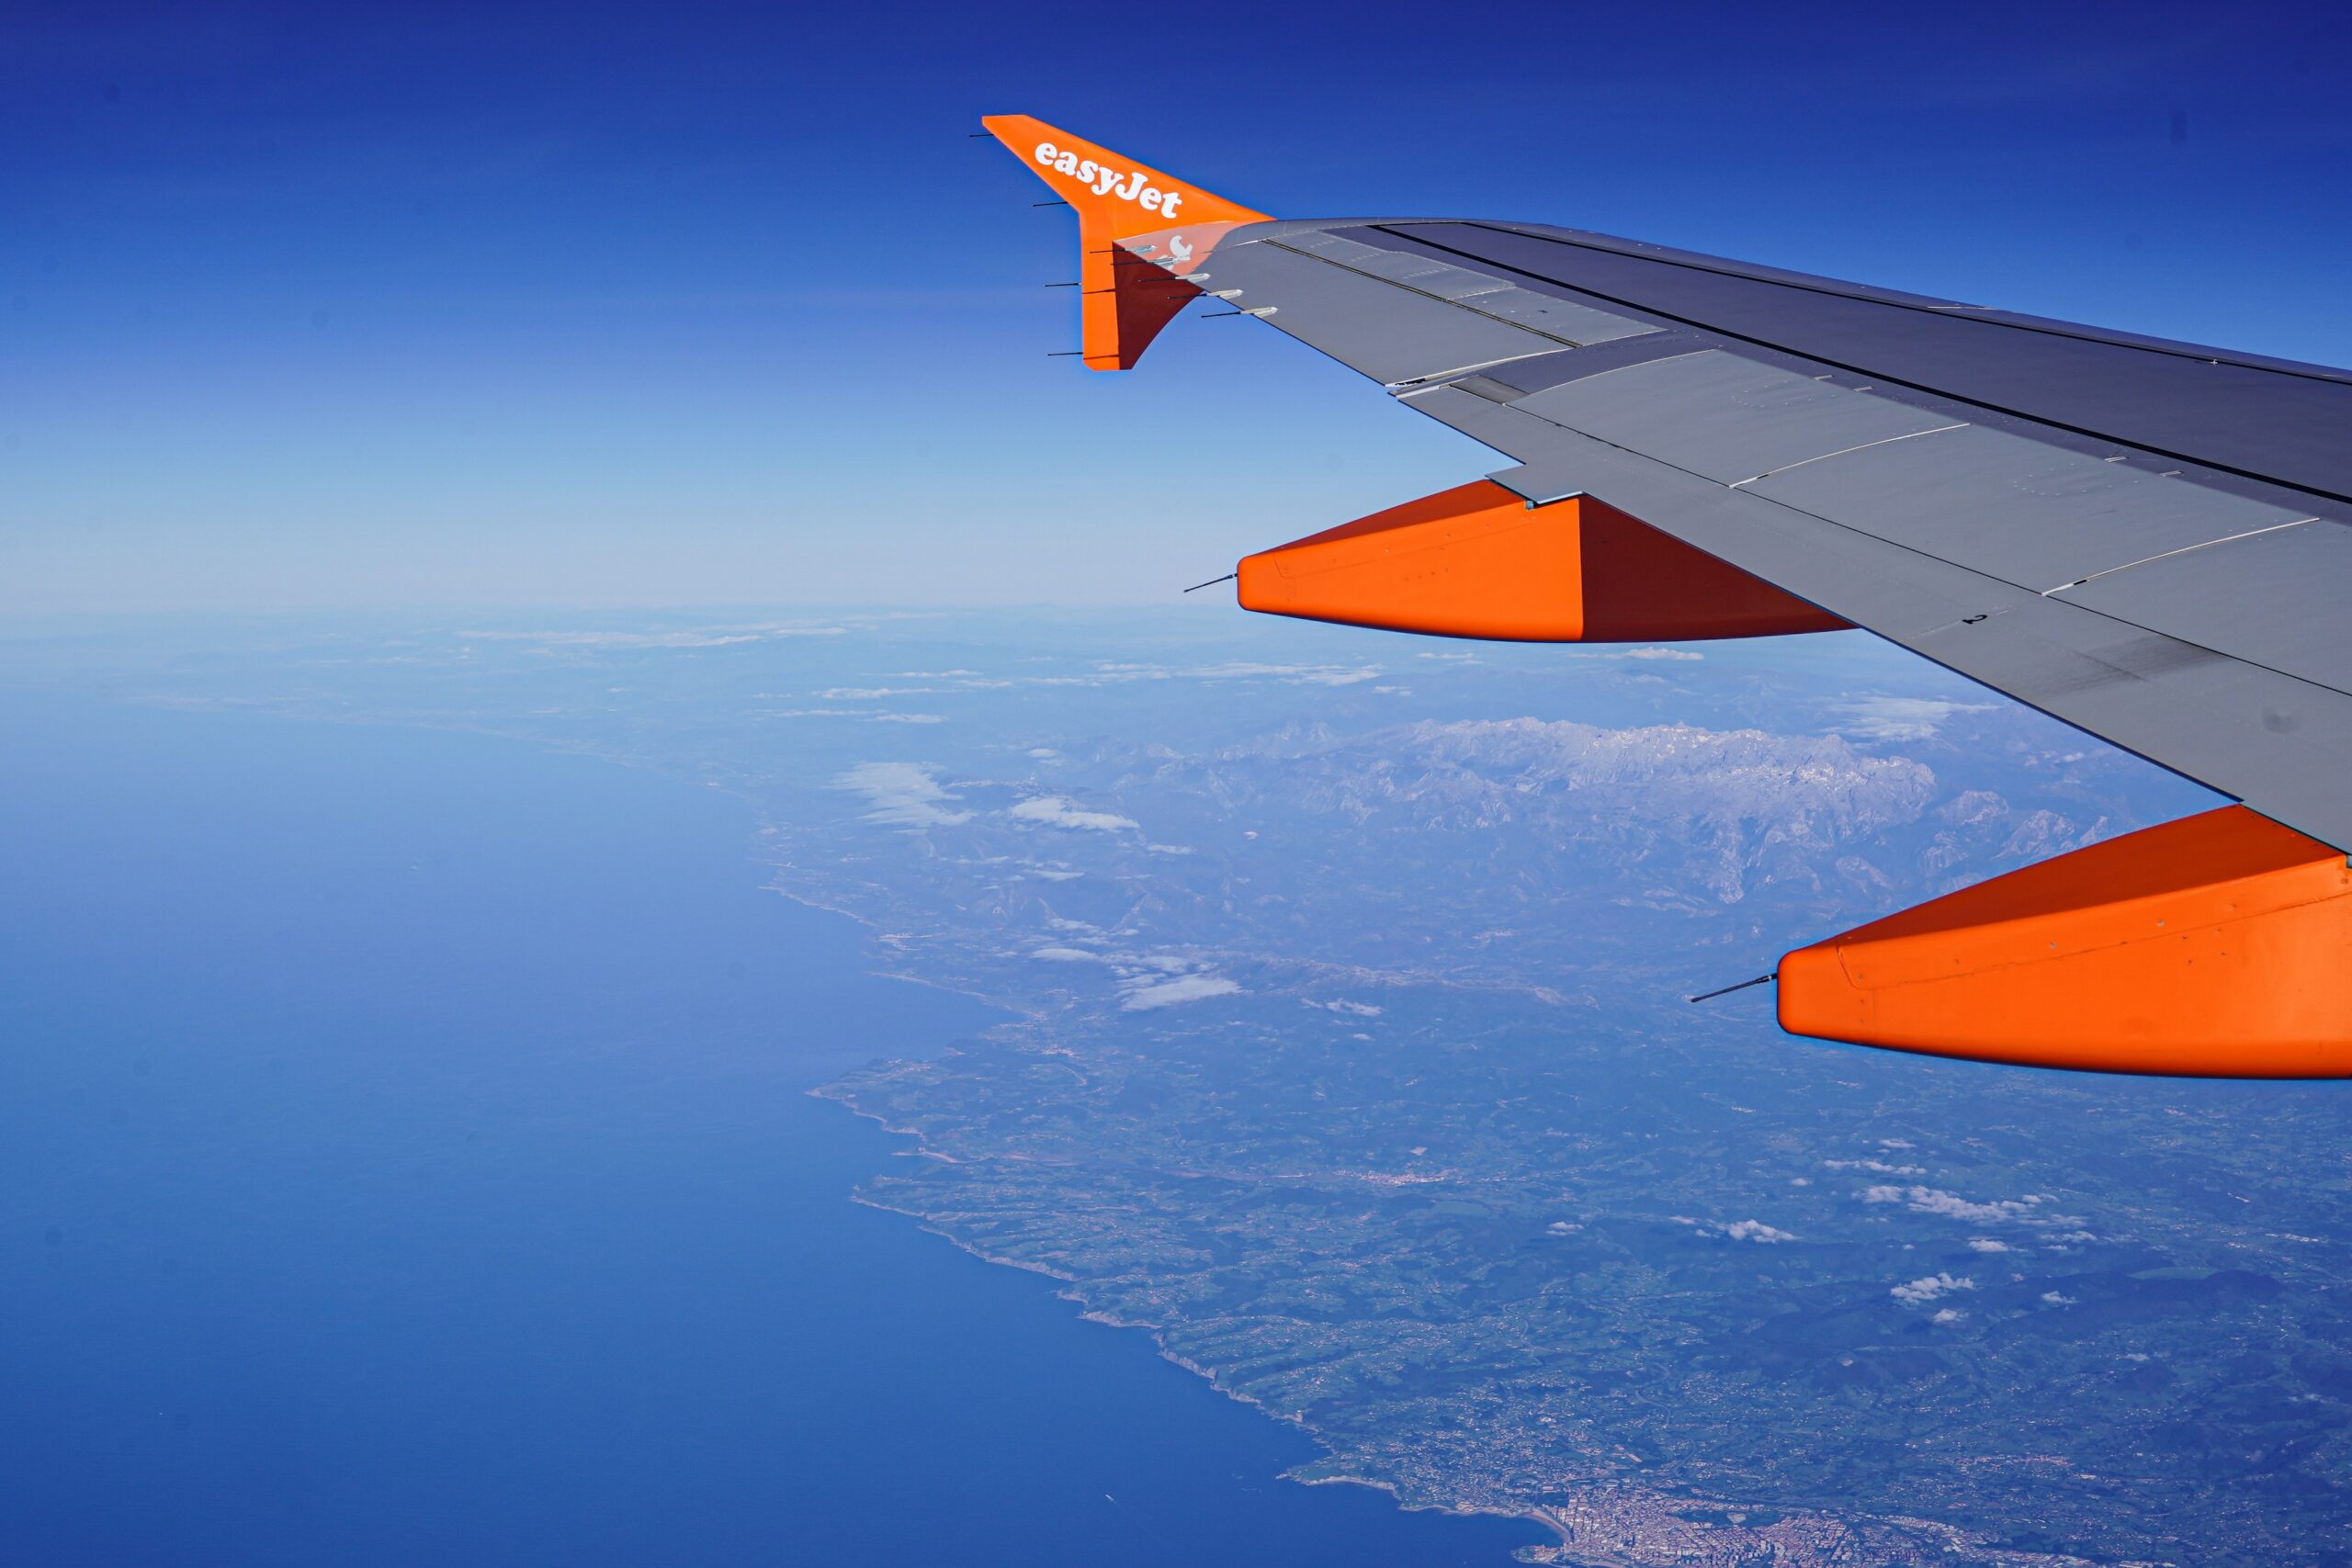 low cost airlines - easy jet in the sky